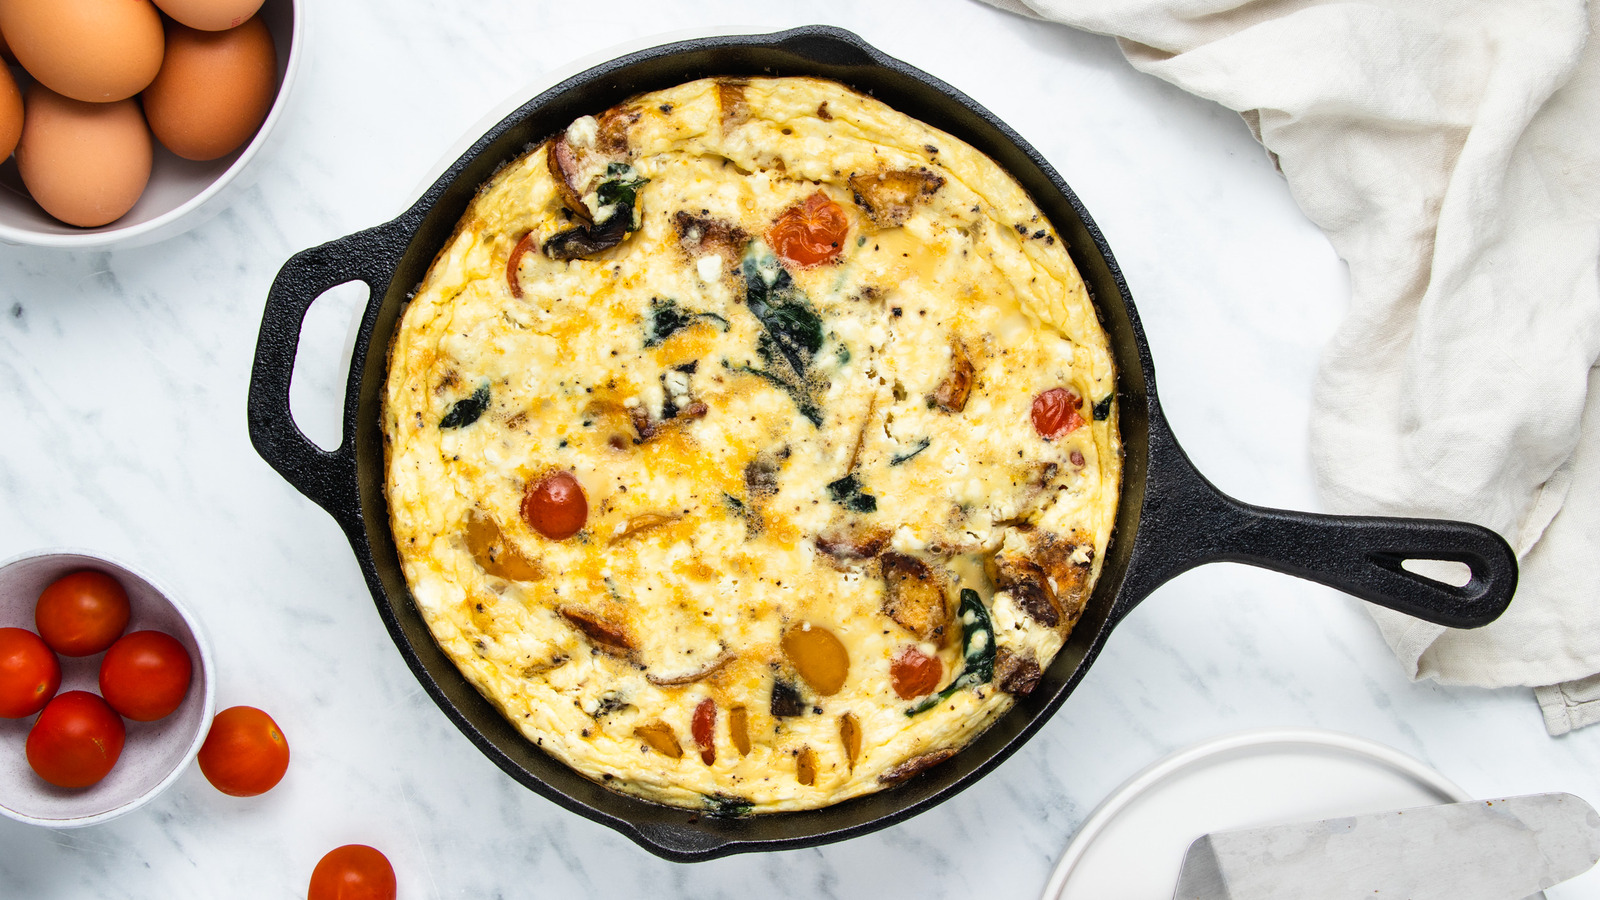 https://www.mashed.com/img/gallery/simple-frittata-recipe/l-intro-1655055261.jpg